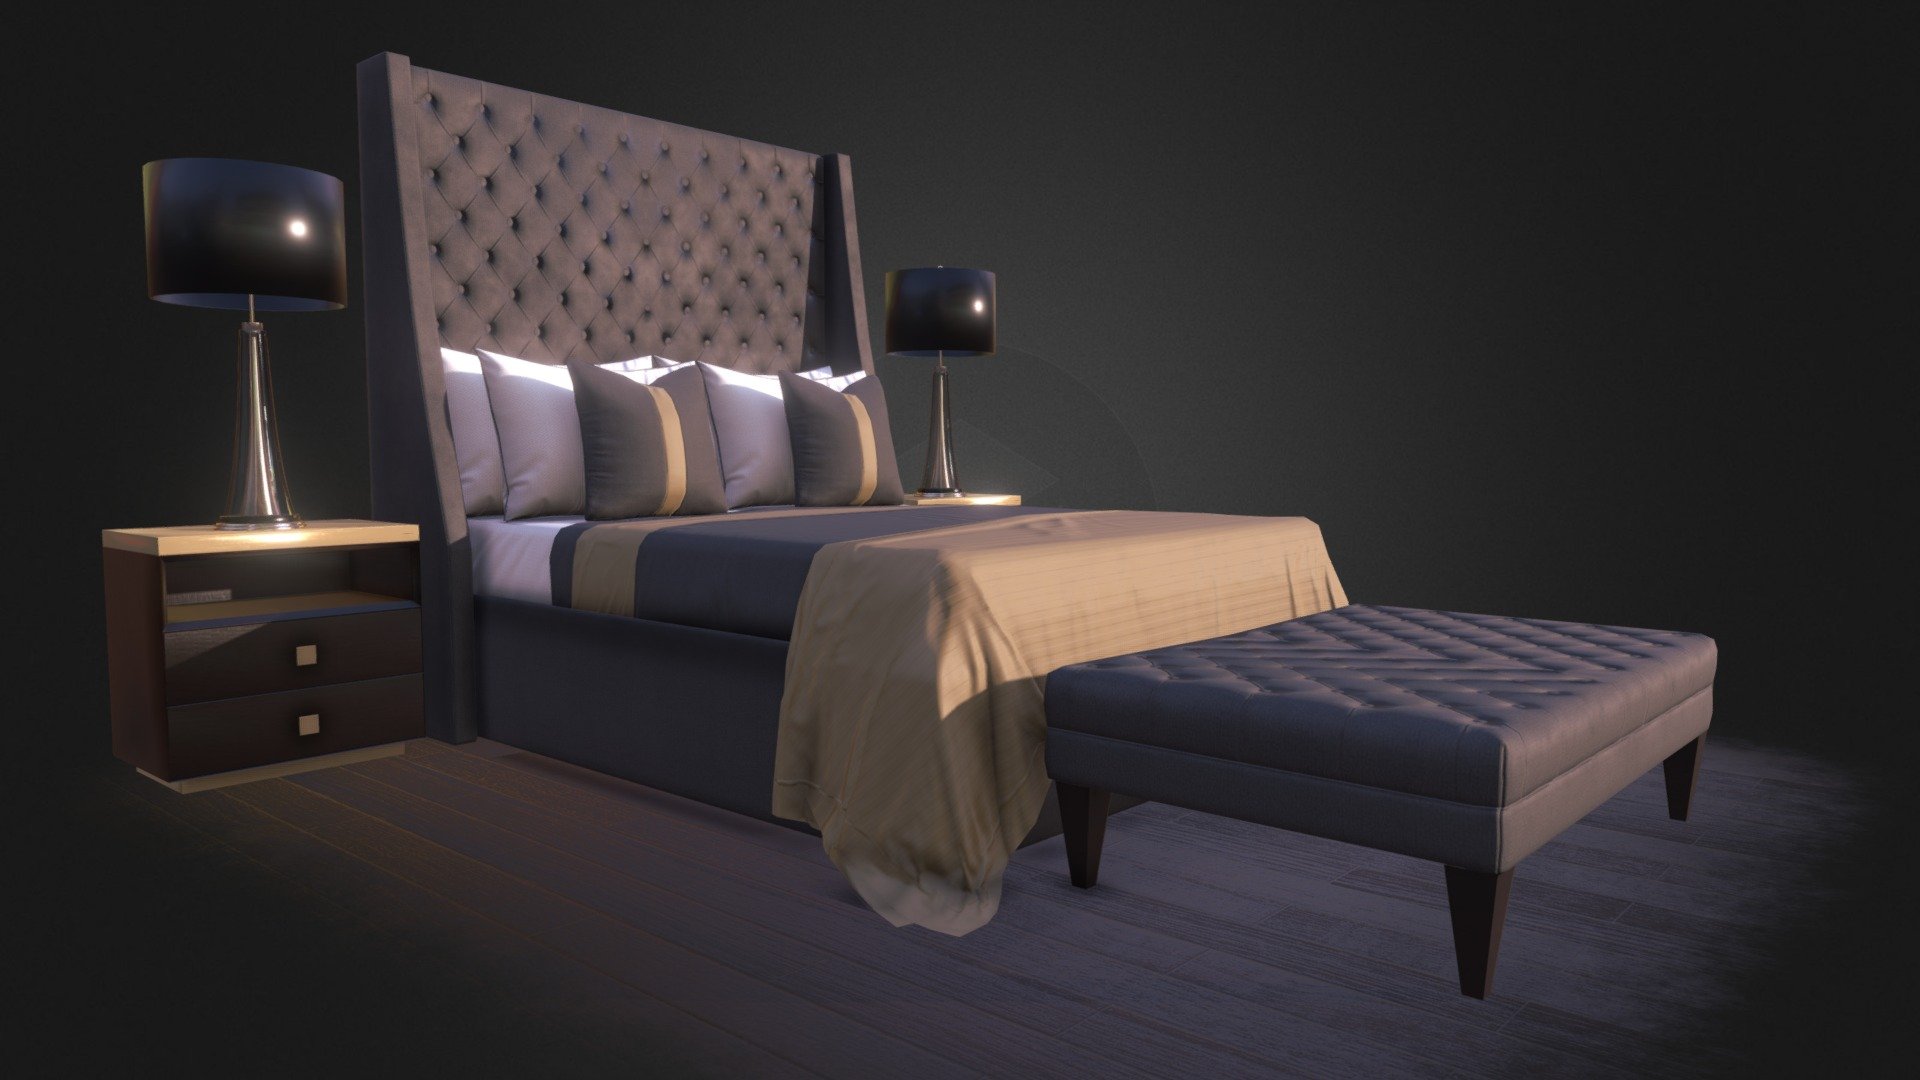 Low poly bed for VR mobile interior App. I use 3dsMax , Topogun, UV layout, Substance painter 3d model